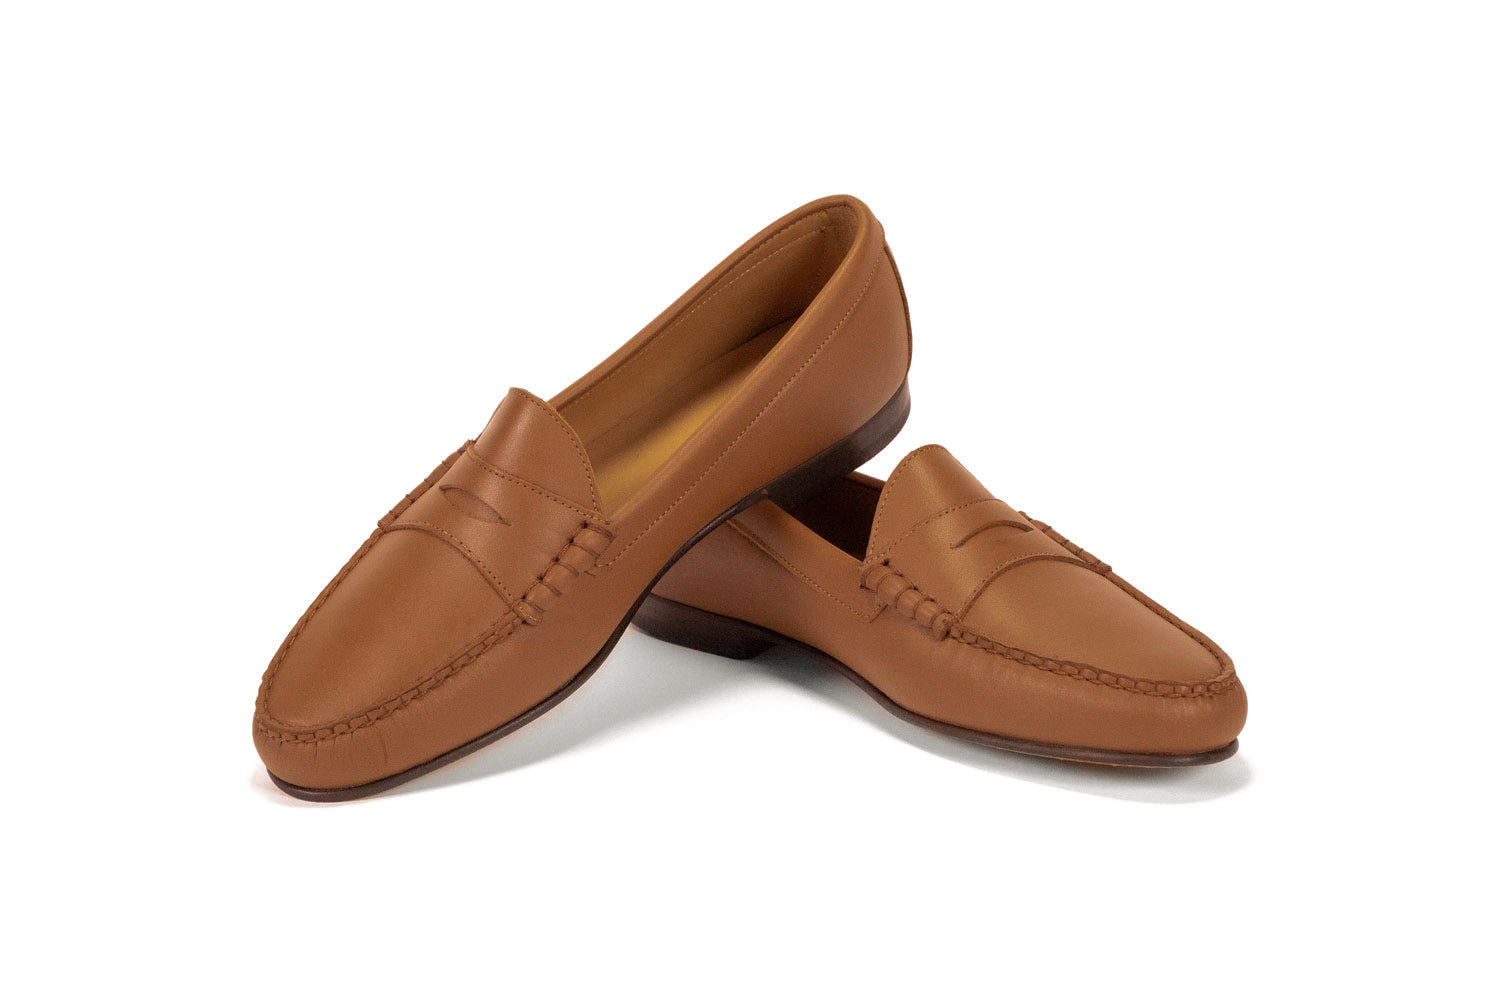 Cromwell Handsewn Full Grain Leather Penny Loafer Jay Butler